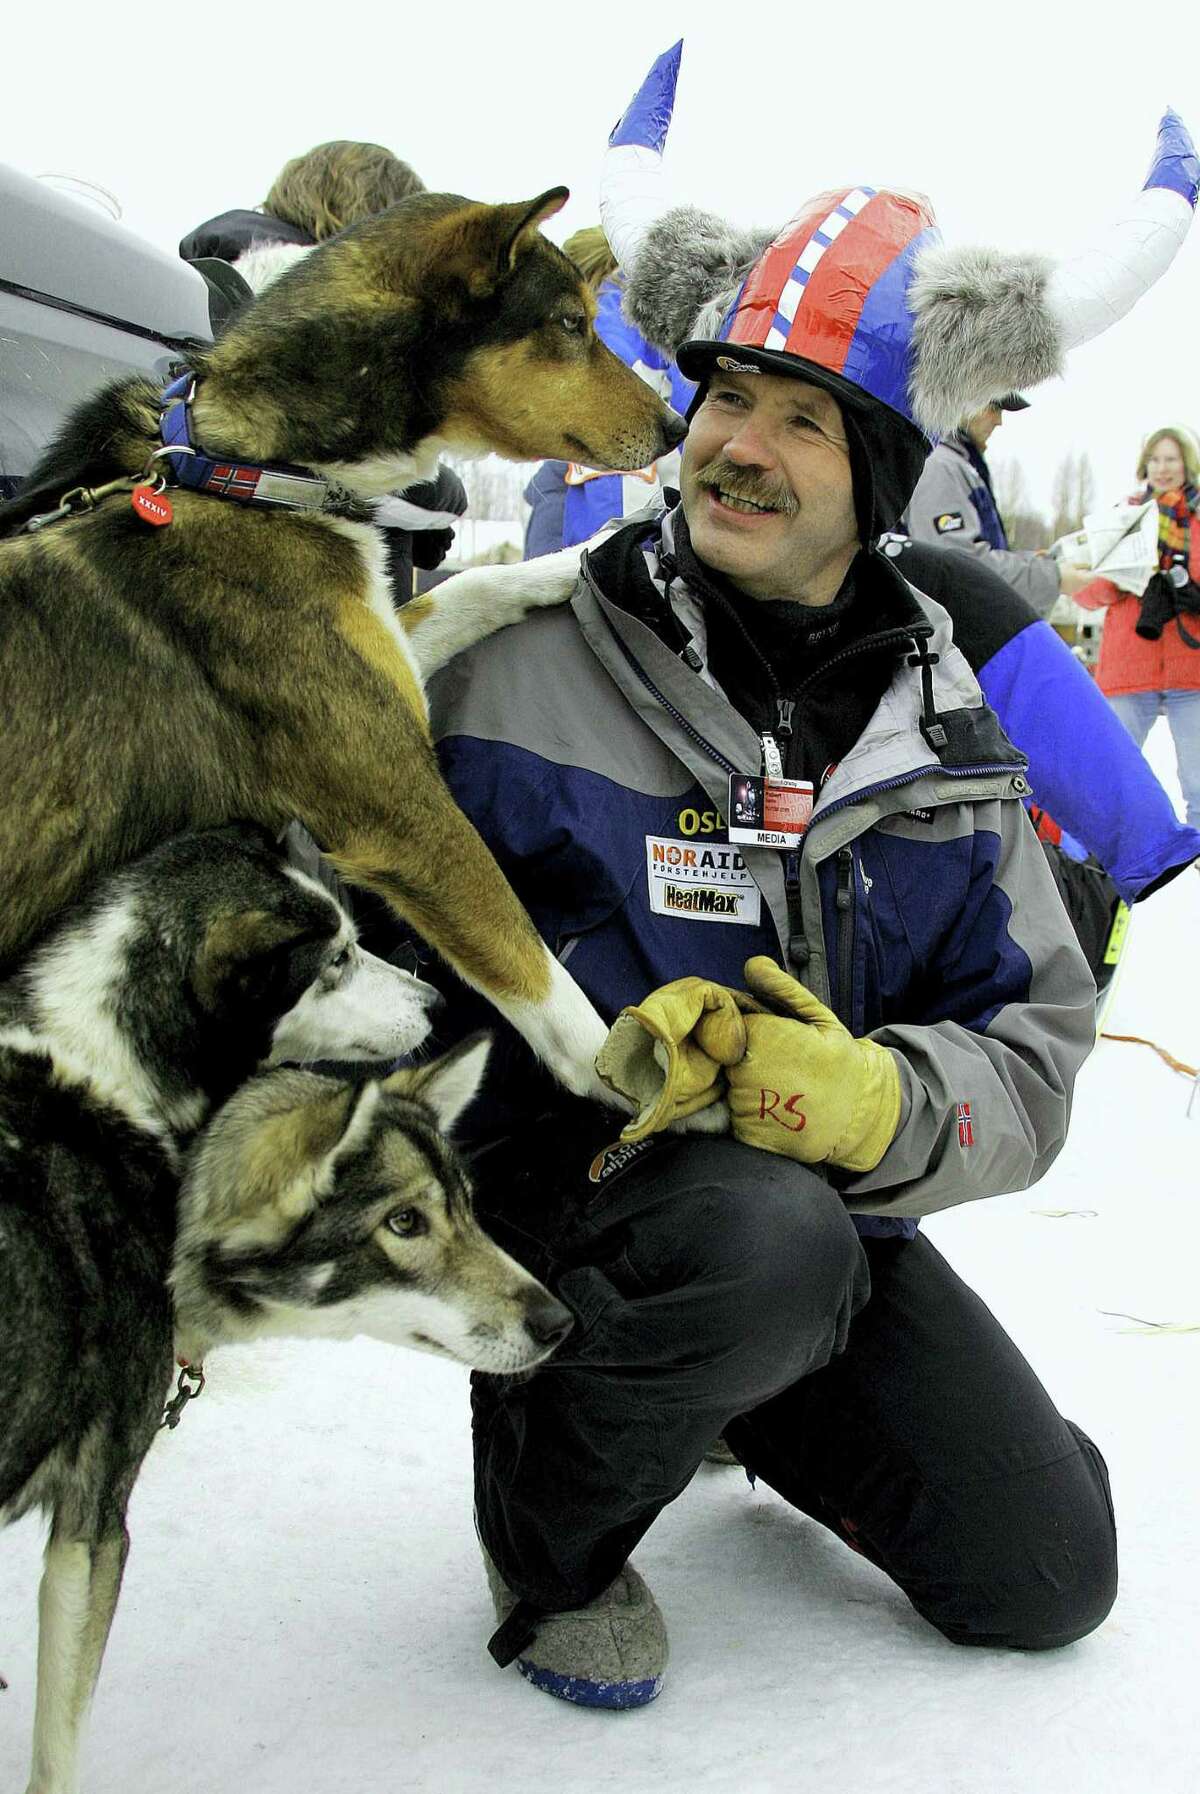 FILE - In this march 5, 2006, file photo, ywo-time Iditarod champion Robert Sorlie, from Norway, plays with Norwegian musher Bjornar Andersen's dogs before the start of the Iditarod Trail Sled Dog Race in Willow, Alaska. An absence of snow, a swan song for two-time champion Robert Sorlie or Norway and Dallas Seavey's bid for a fourth championship in the last five years highlight this year's Iditarod Trail Sled Dog Race. The world's most famous sled dog race starts Saturday in downtown Anchorage with a fan-friendly parade of mushers and their furry teams. (AP Photo/Al Grillo, File)